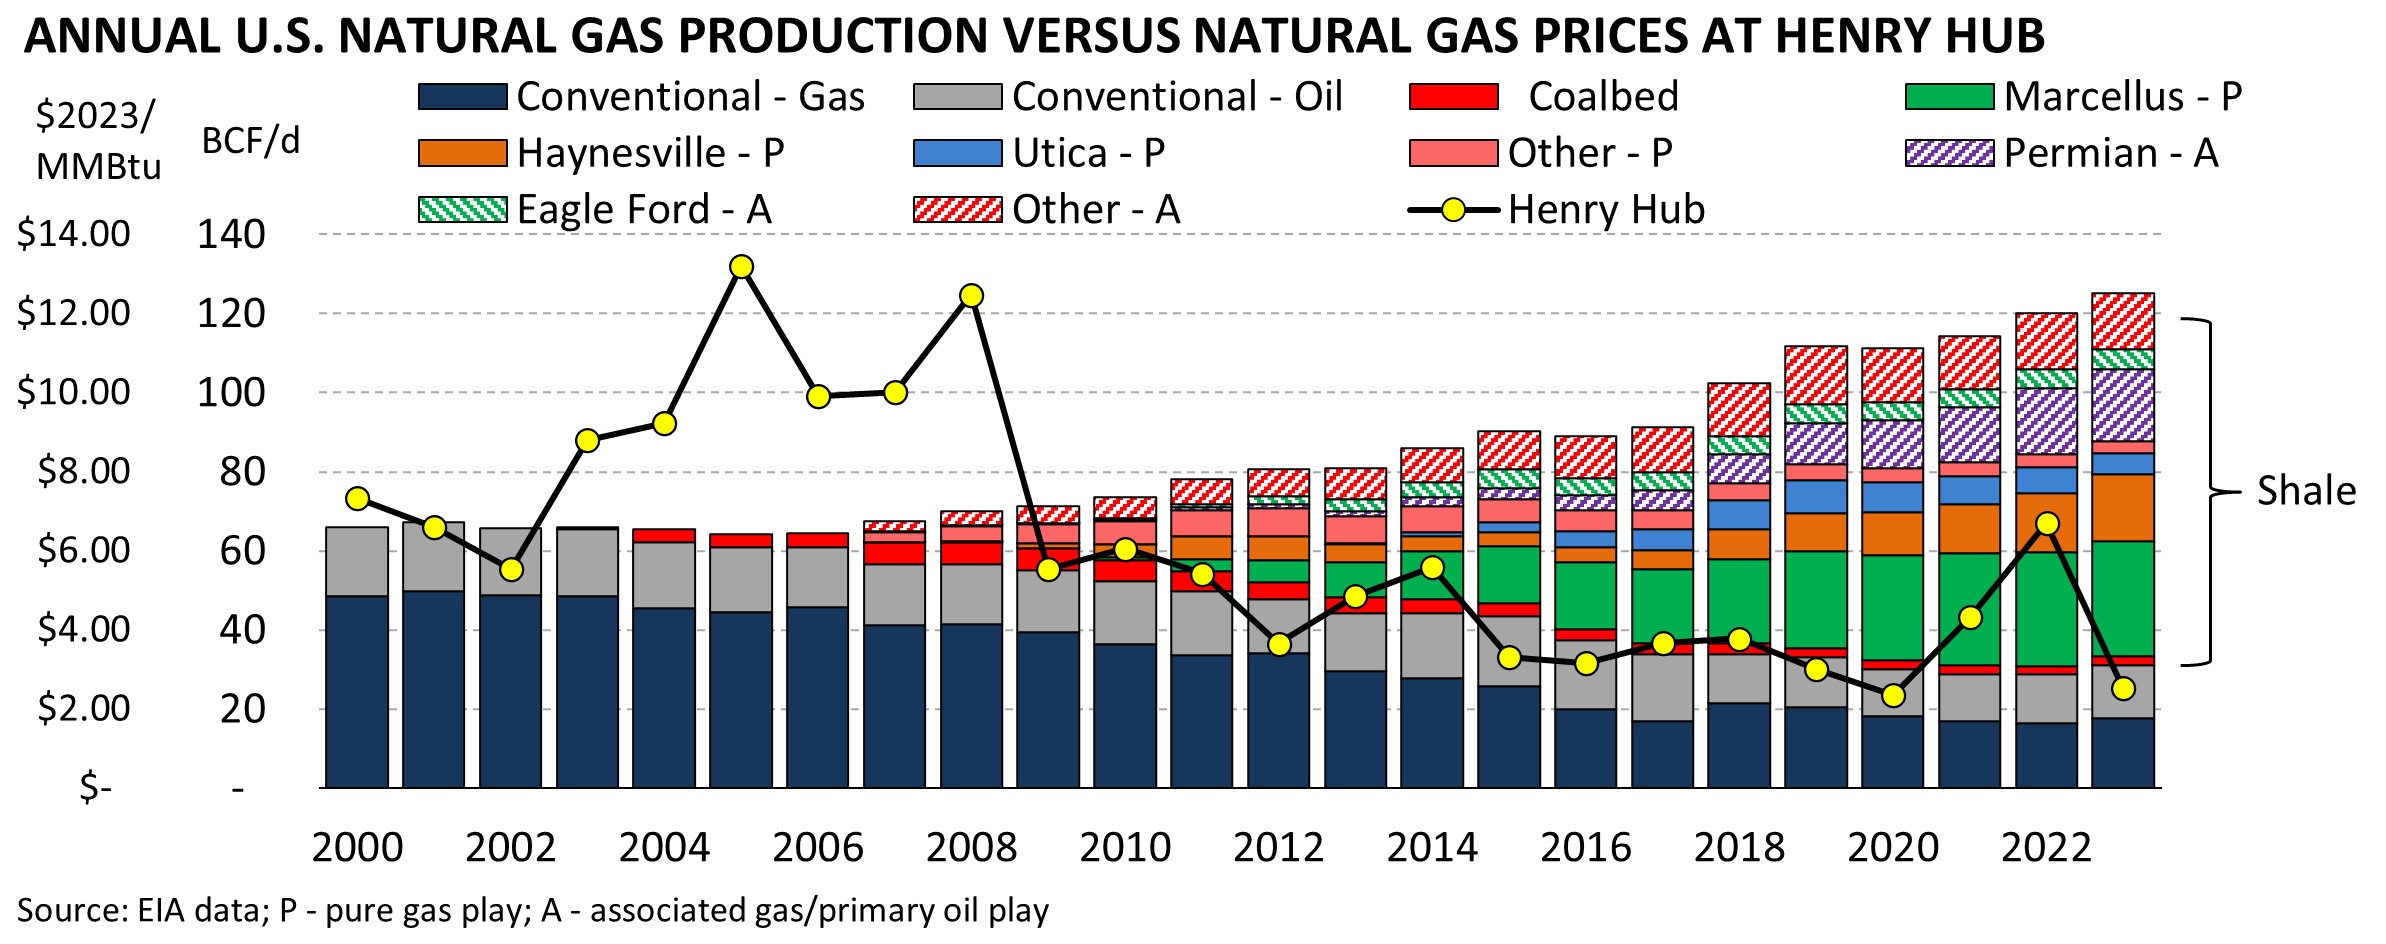 Annual U.S. Natural gas Production versus Natural Gas Prices at Henry Hub